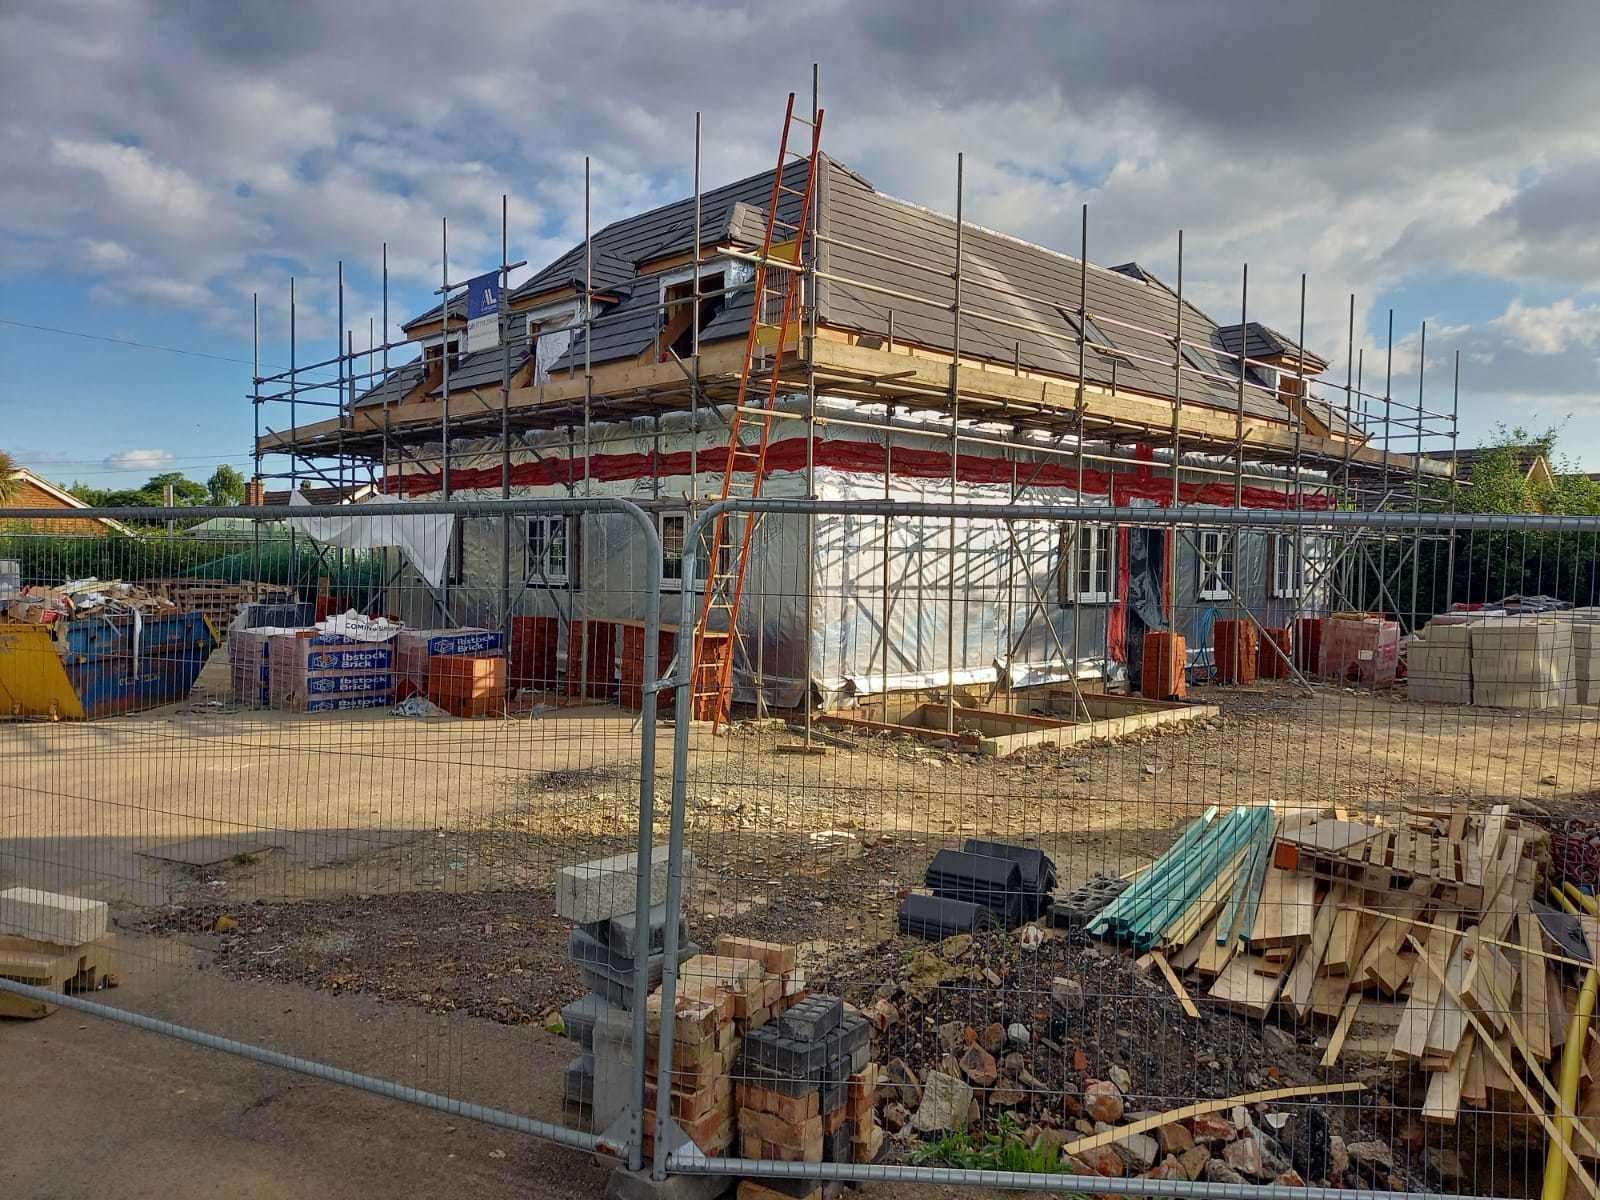 The £1.3 million development of the Plough Inn in Broomfield, Herne Bay, also includes the construction of a new house and block of four flats on the land